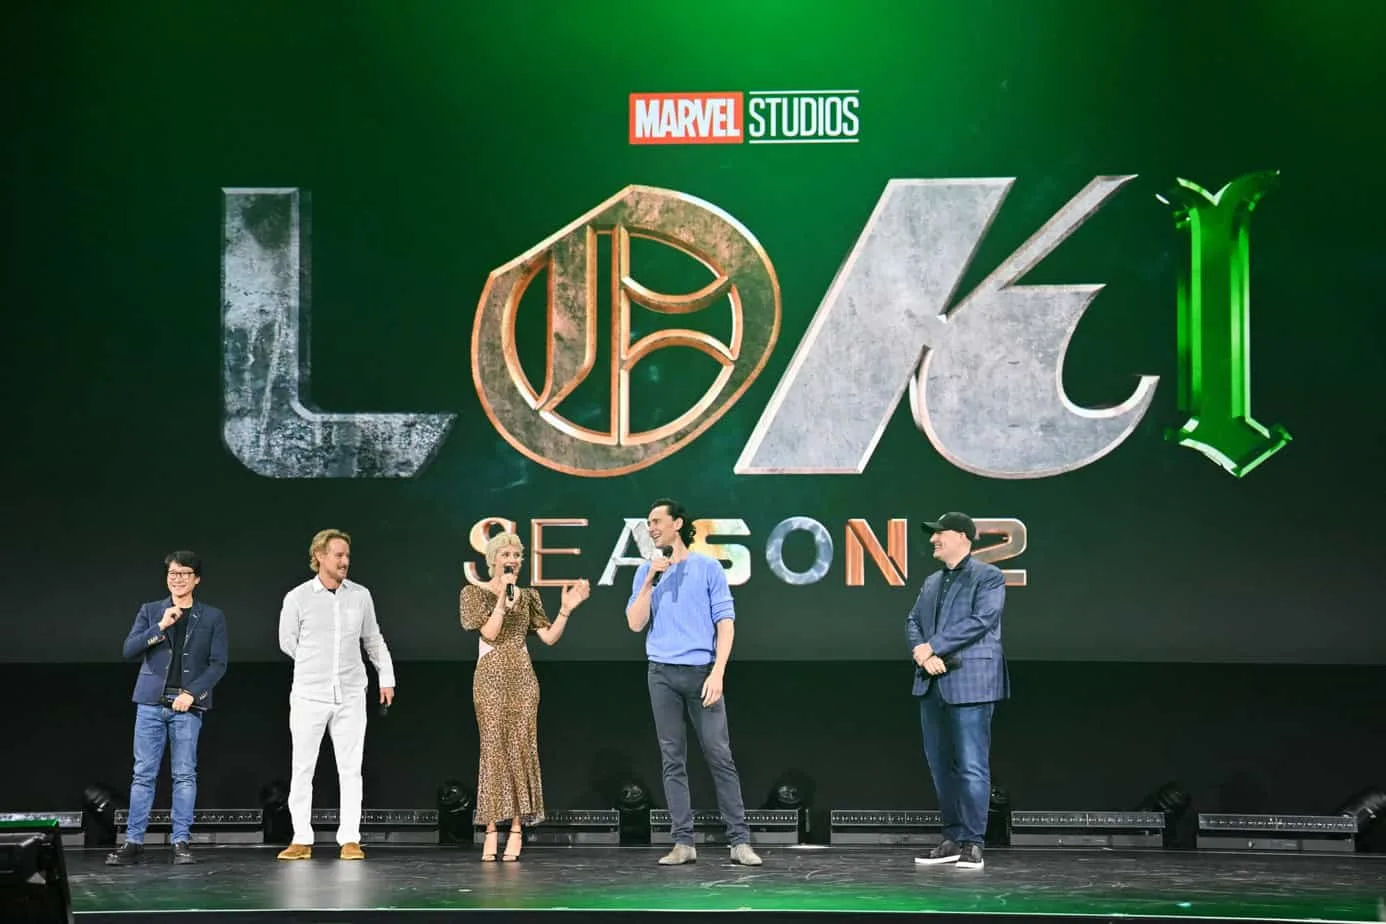 The cast of Loki Season 2 on stage during the Marvel Studios panel at D23 Expo 2022 with the Loki logo behind them.